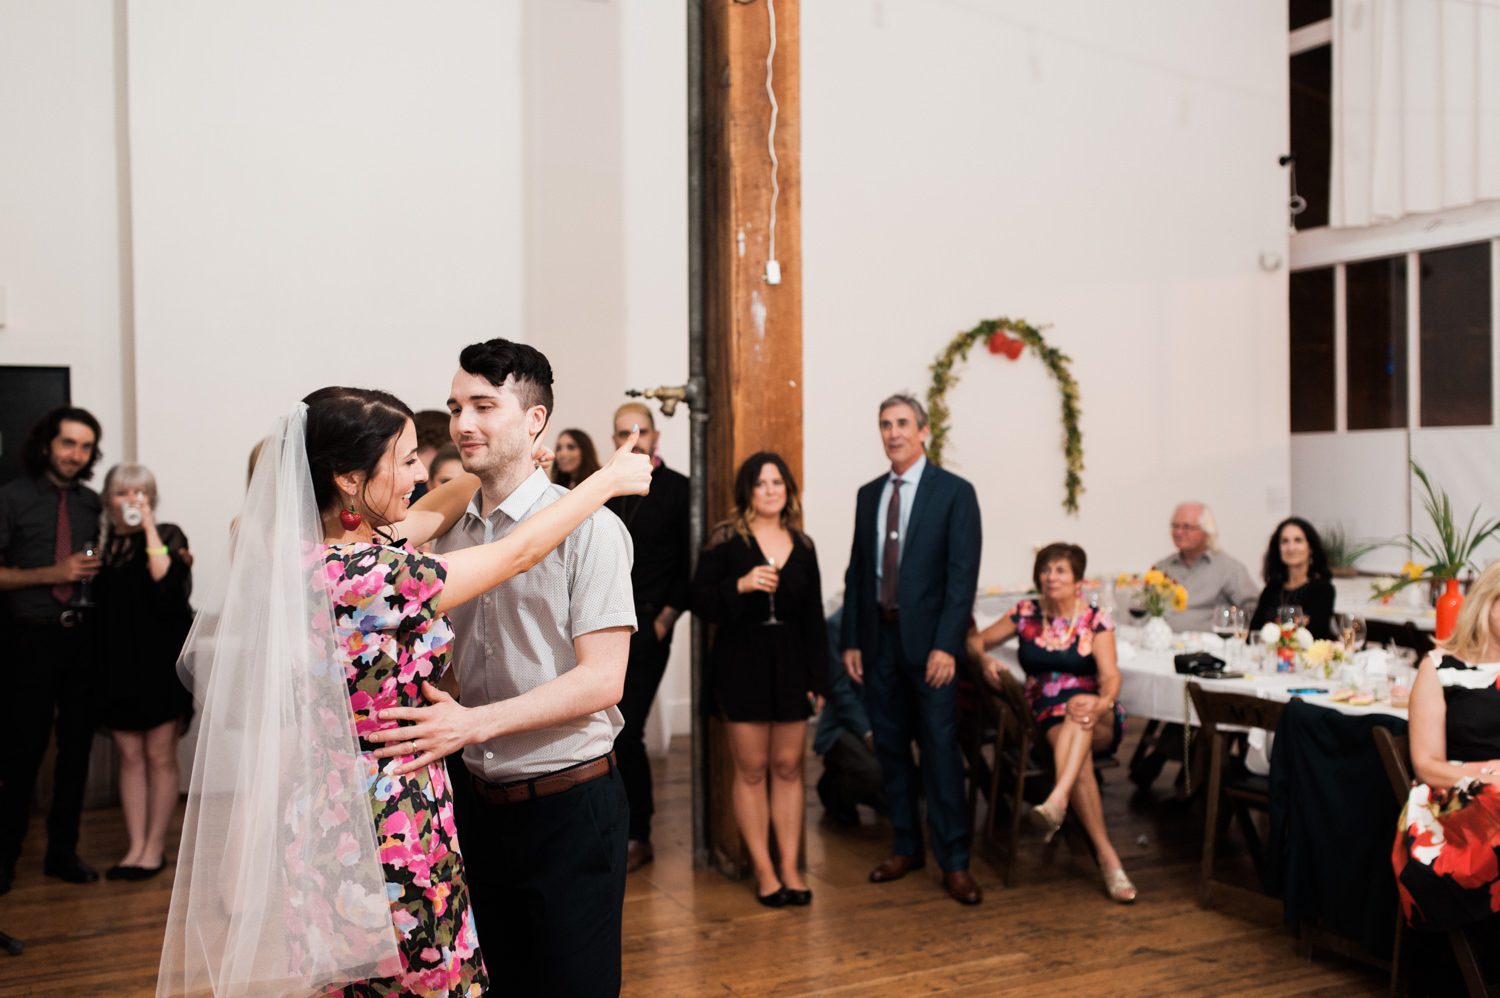 The bride and groom have their first dance. The Cleaners wedding photographer Briana Morrison